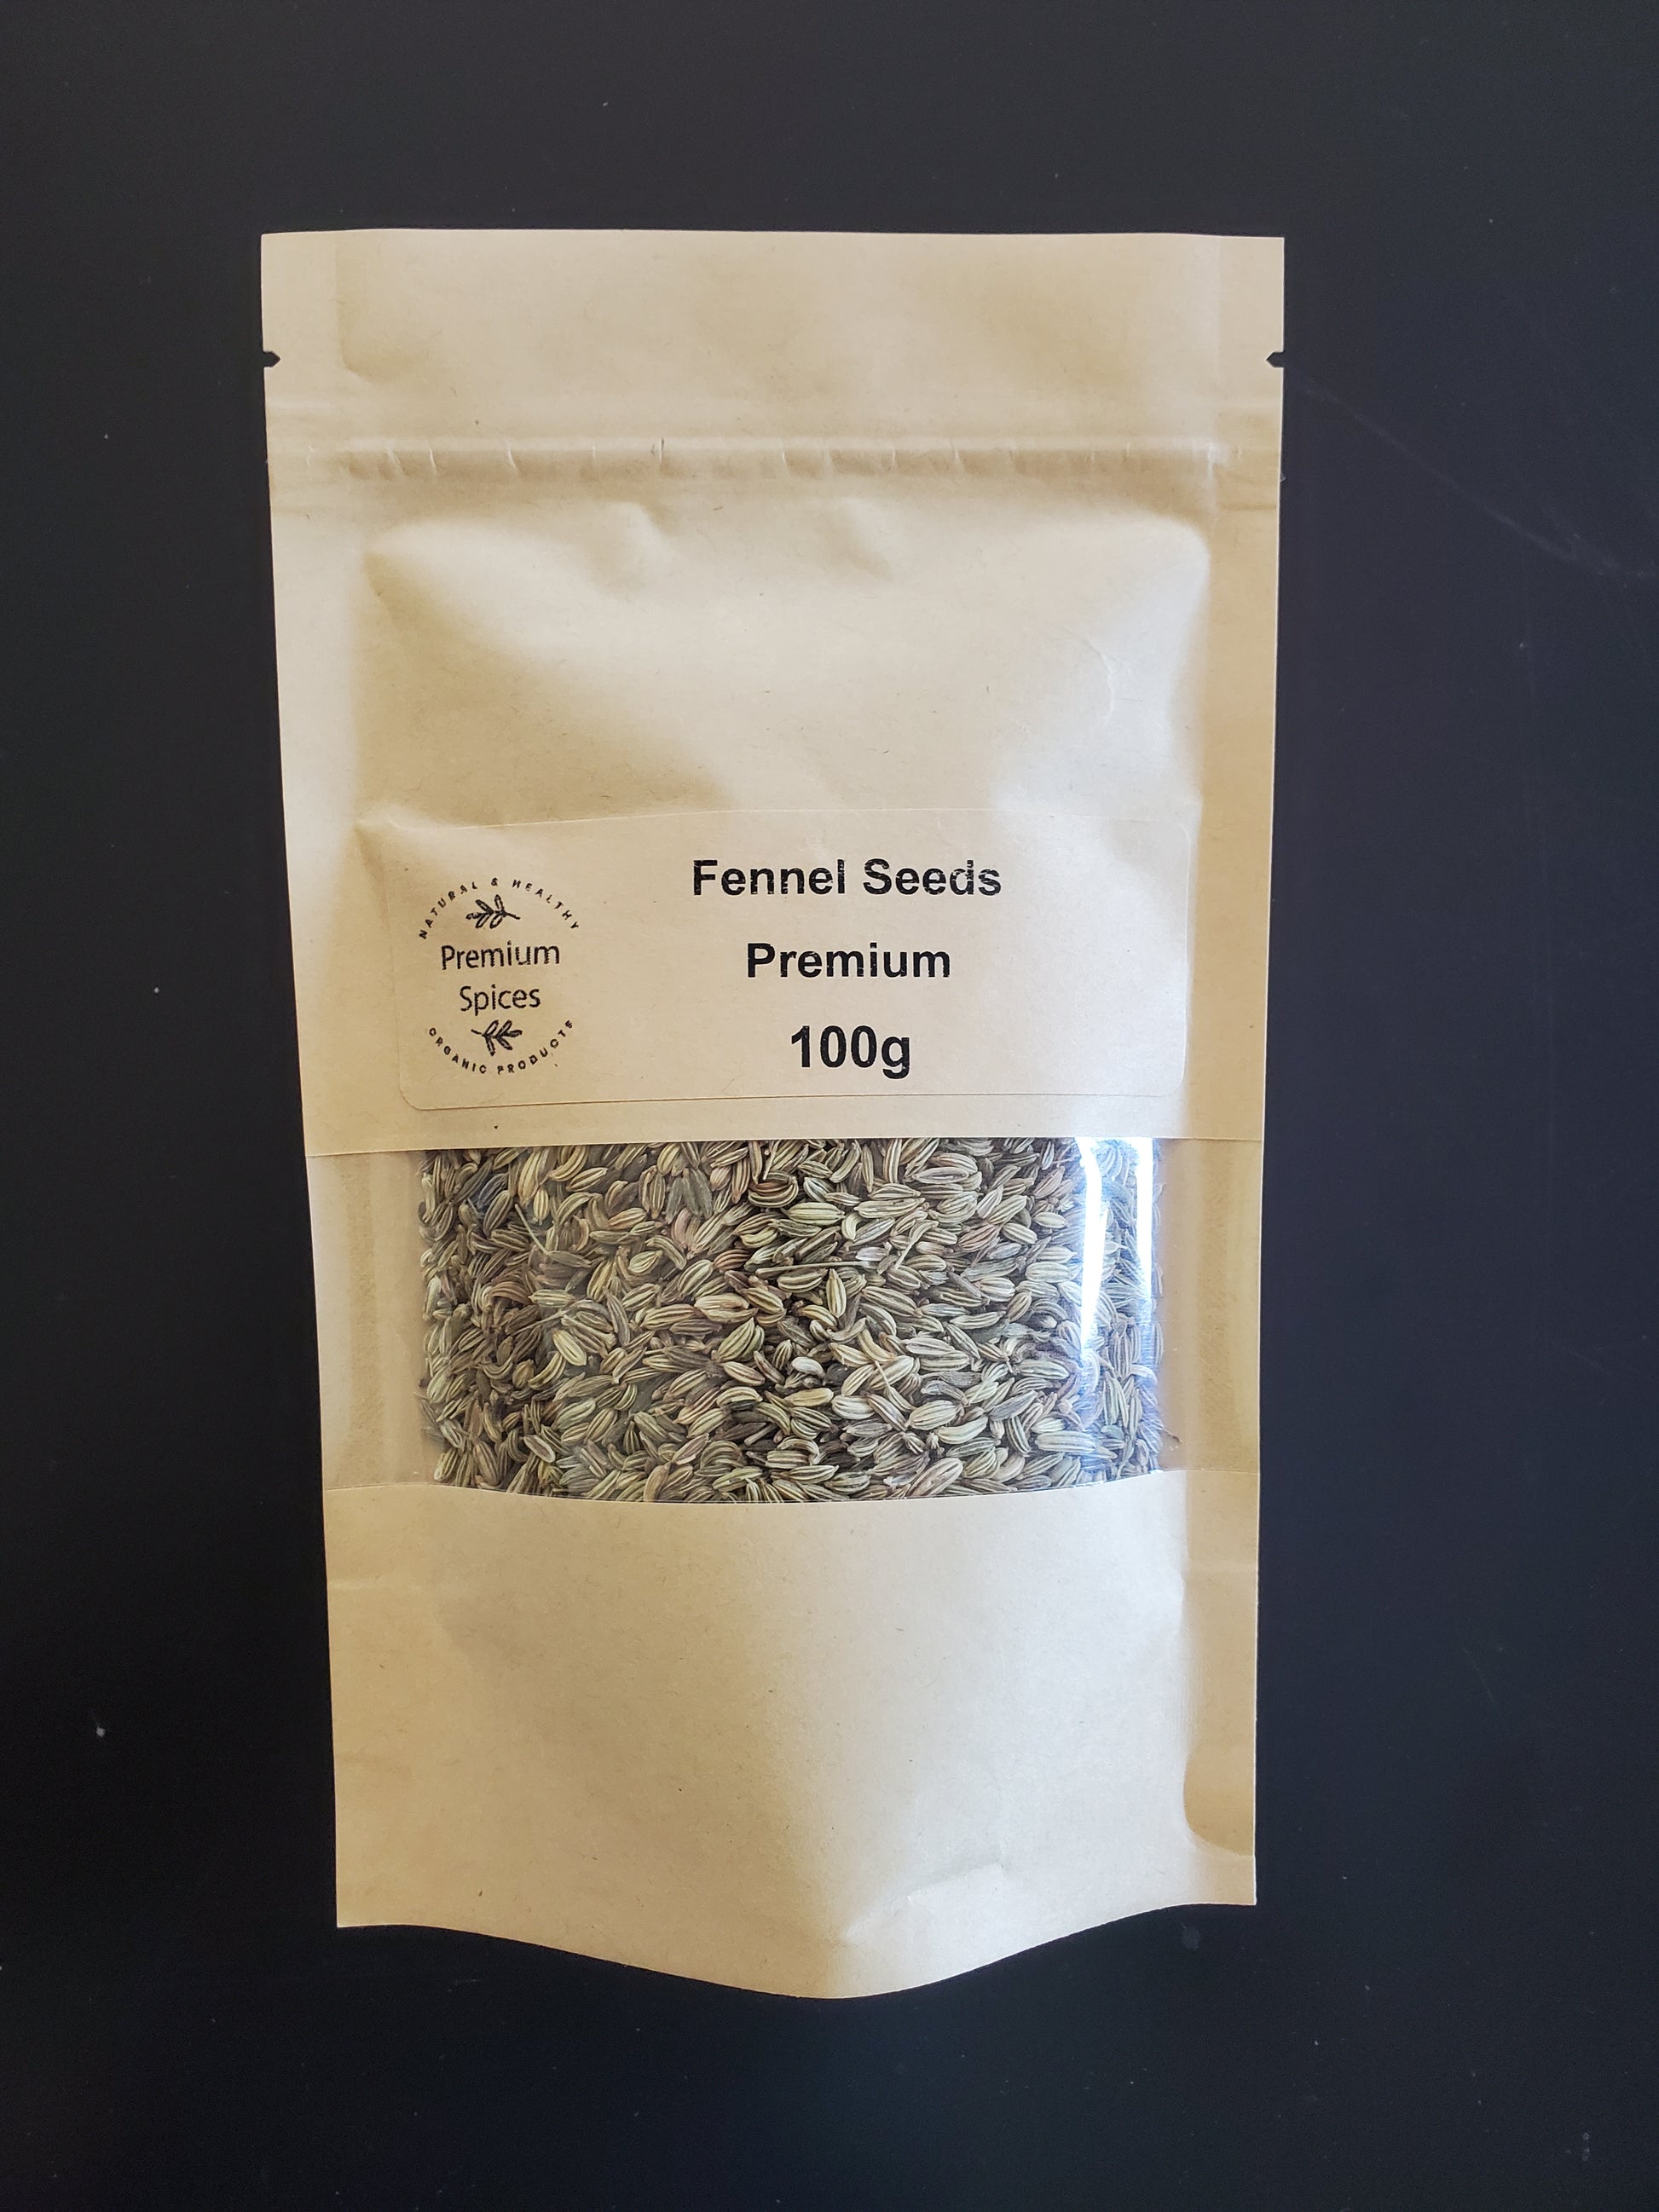 Fennel Seeds NZ | Fennel Herbs | Indian Spices SHowing nice eco friendly 100g bag of the fennel seed